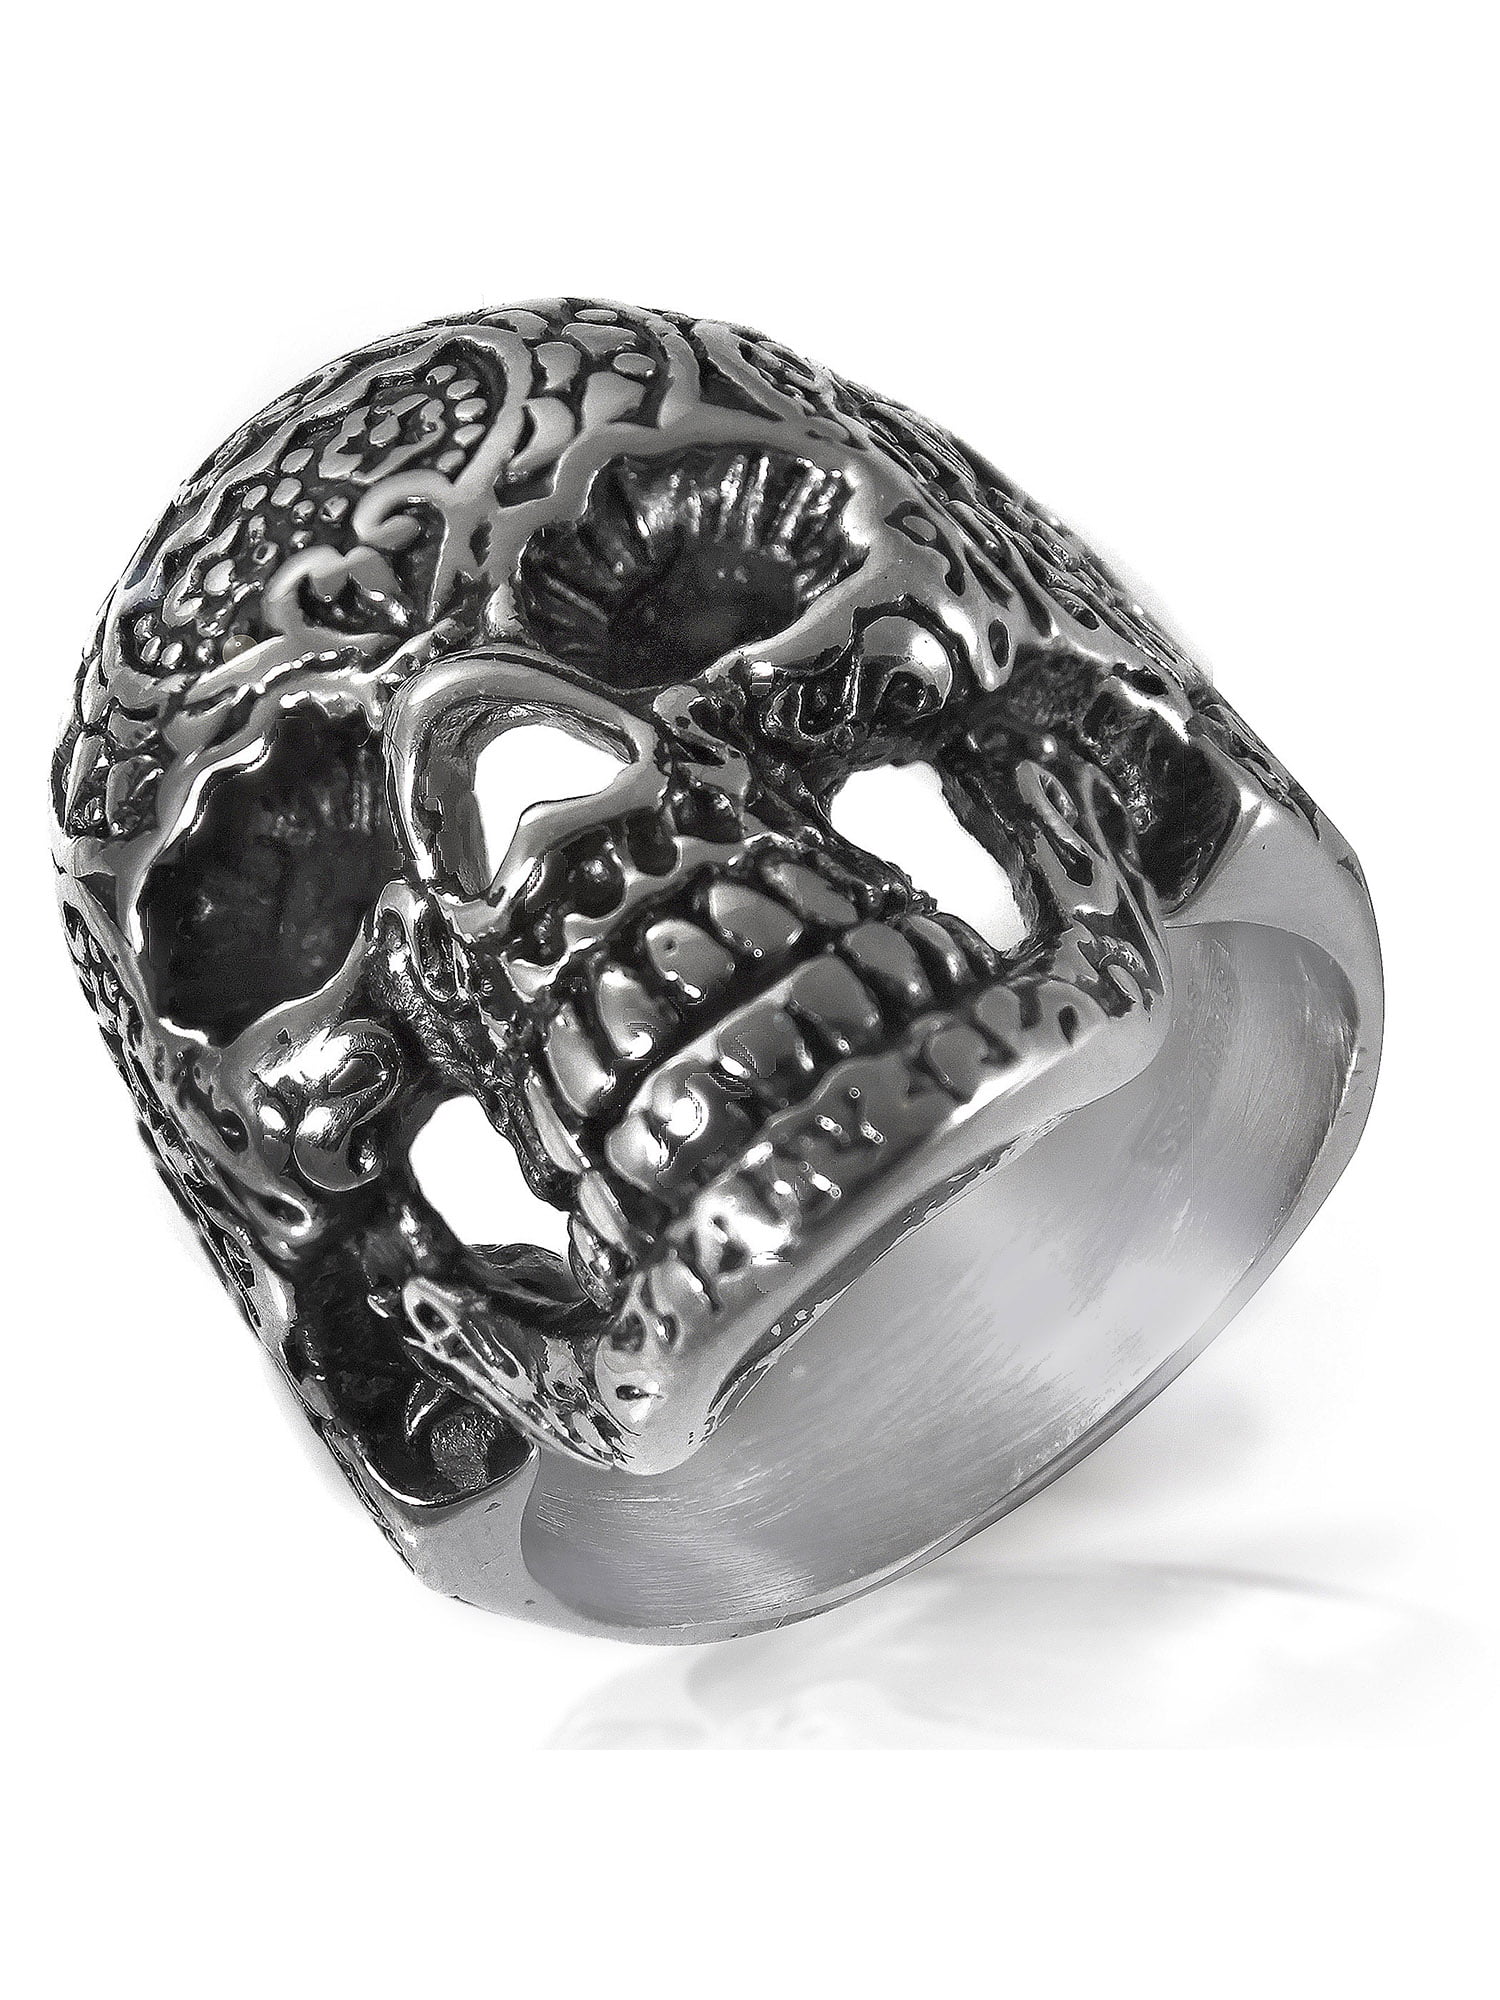 Large Men's 316L Stainless Steel Ring Vintage Skull Gothic Silver Tone HOT SALE 